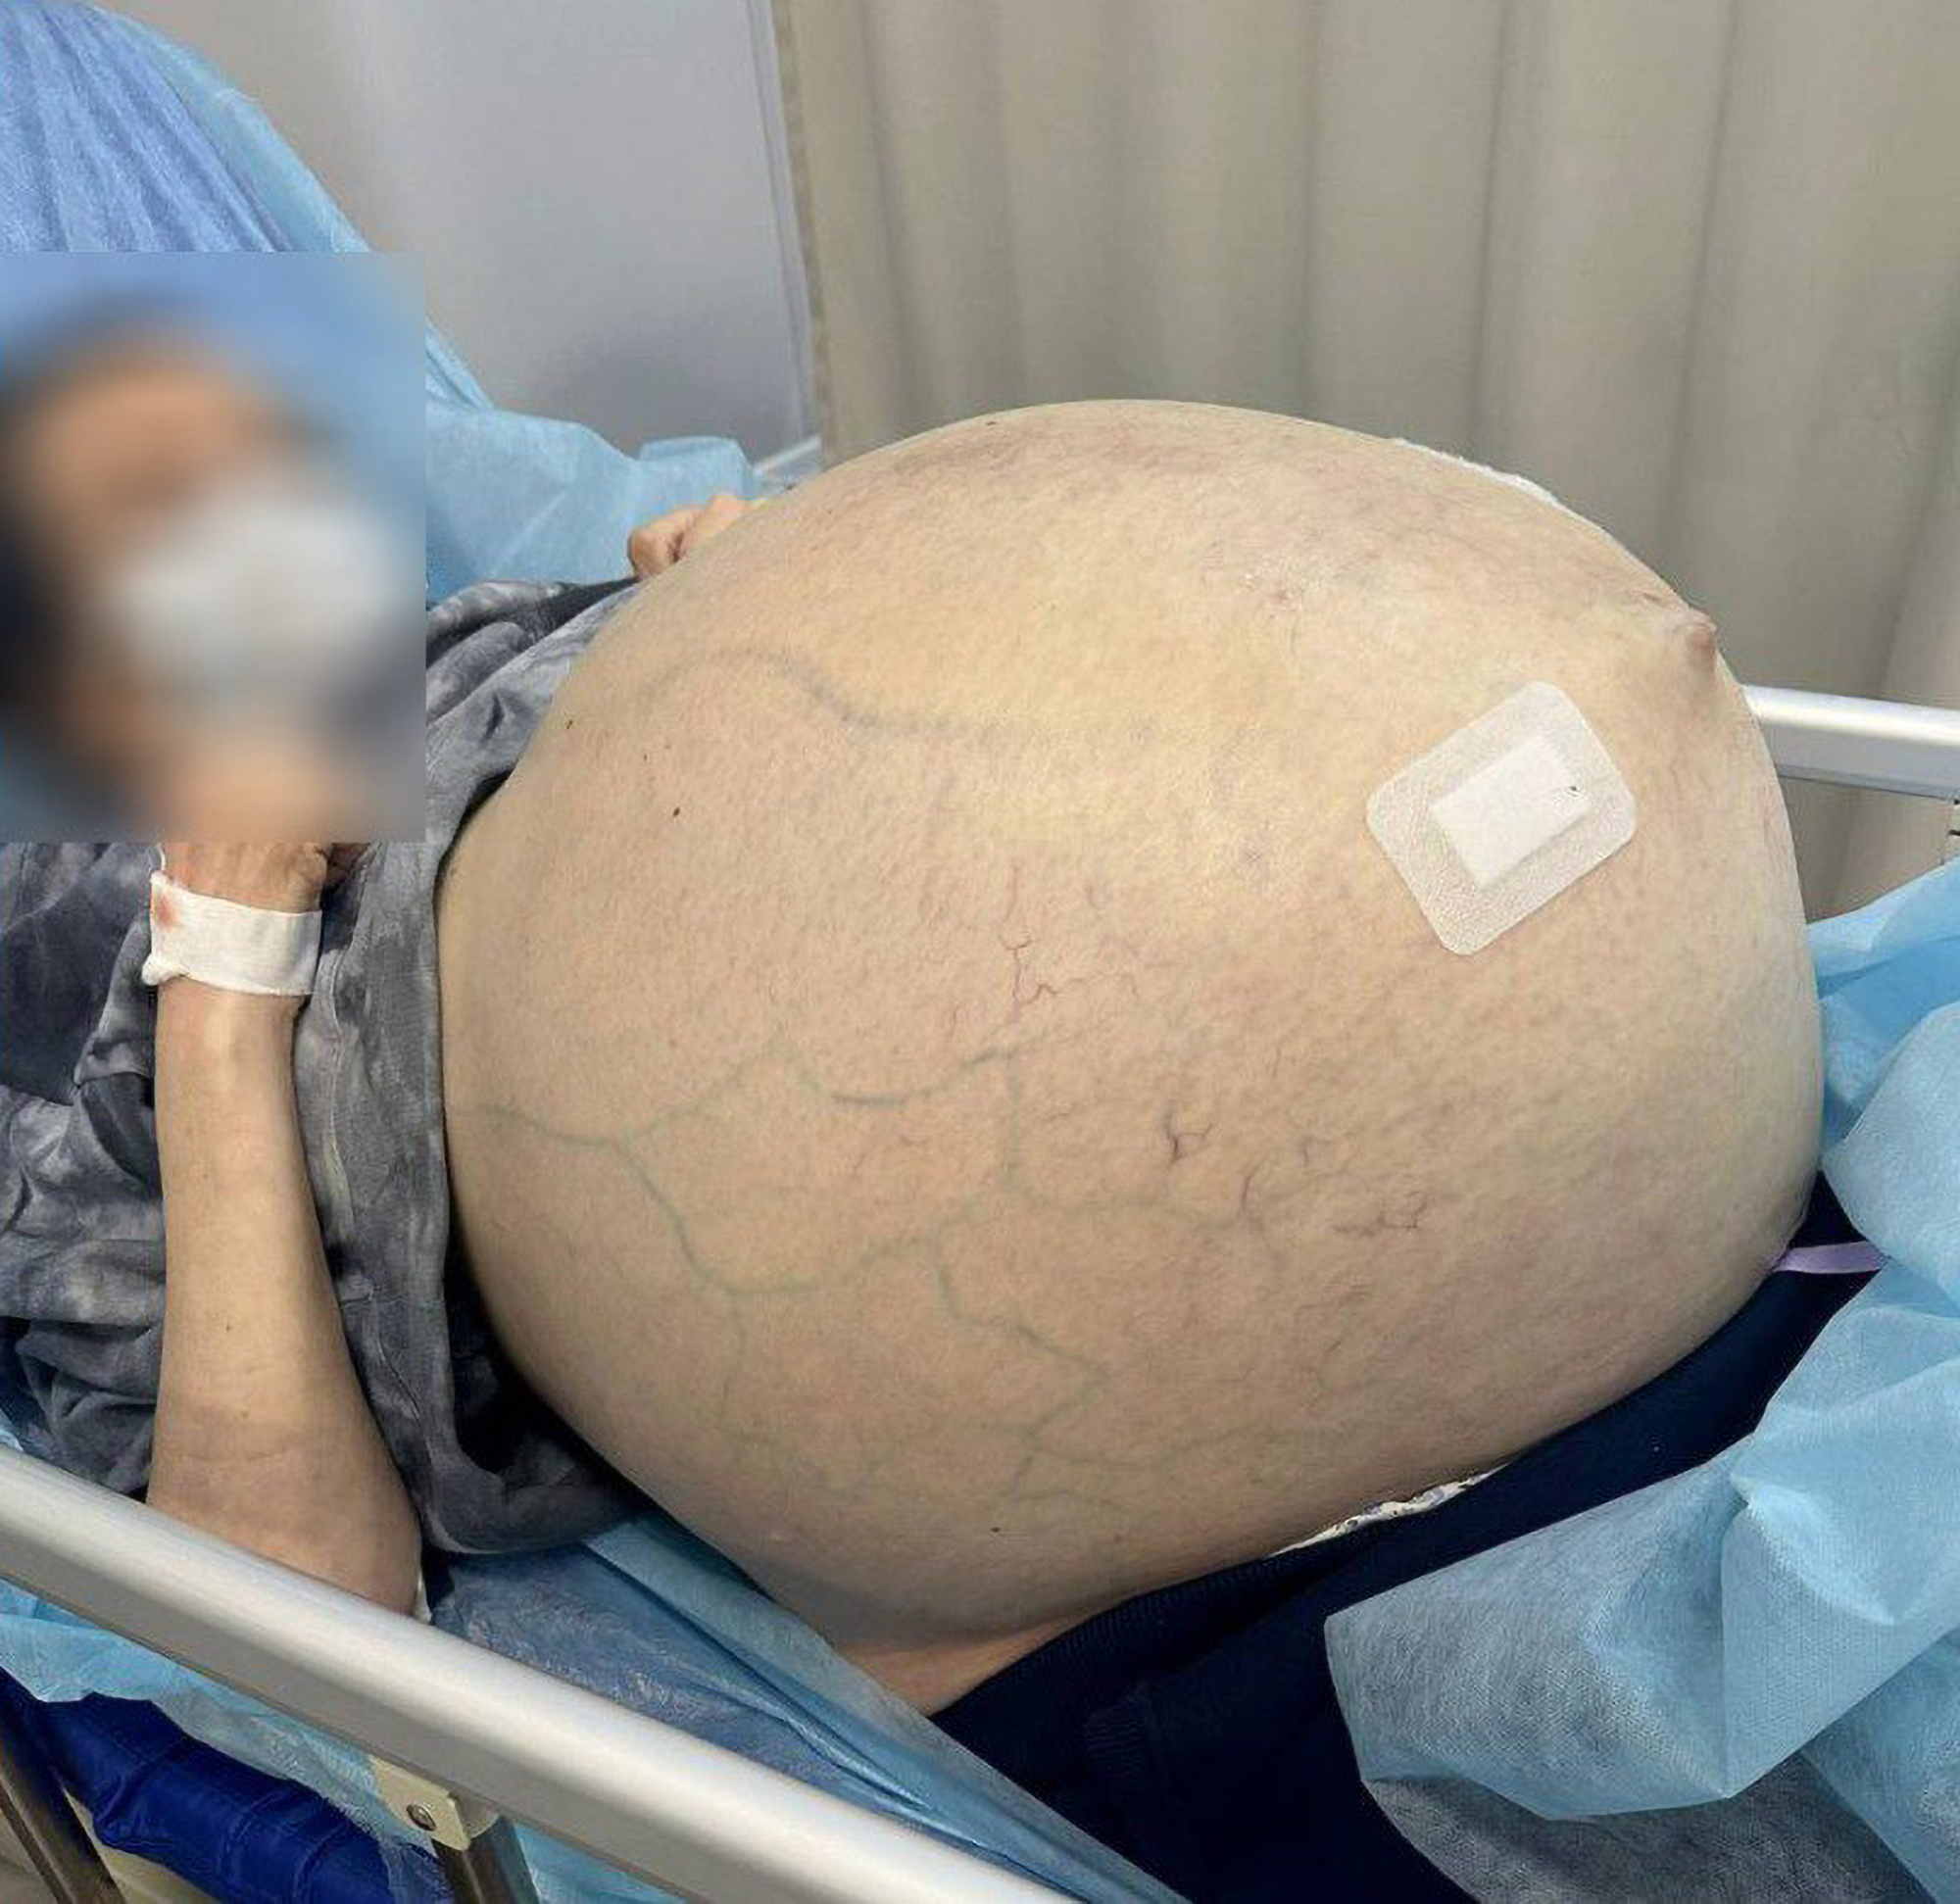 Read more about the article Woman Has Giant Ovarian Tumour Weighing 30 Kilogrammes Removed After Living With It For 10 Years